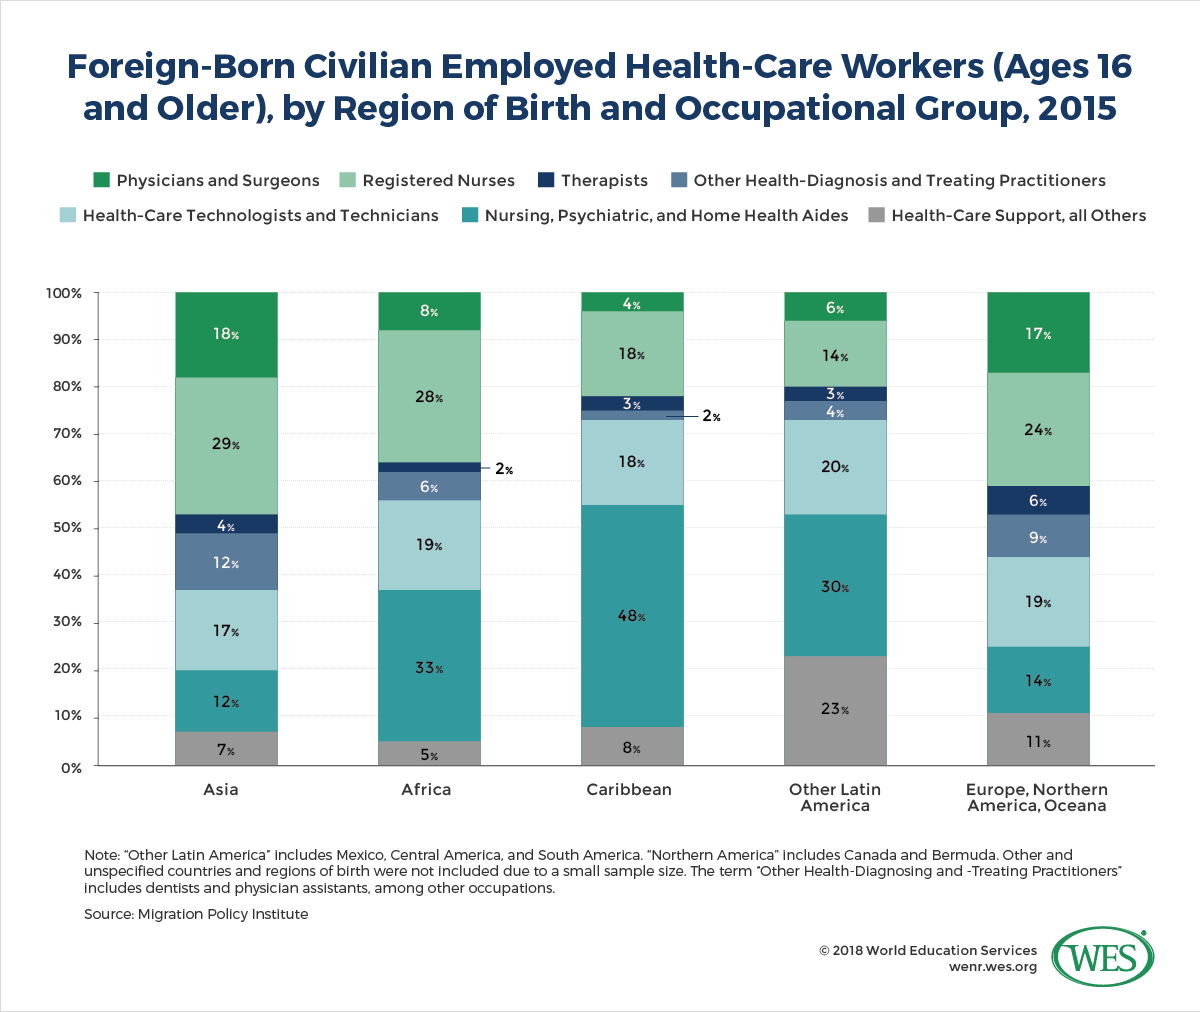 A chart showing the percentage of foreign-born civilian employed health-care workers age 16 and older by region of birth and occupational group in 2015. 